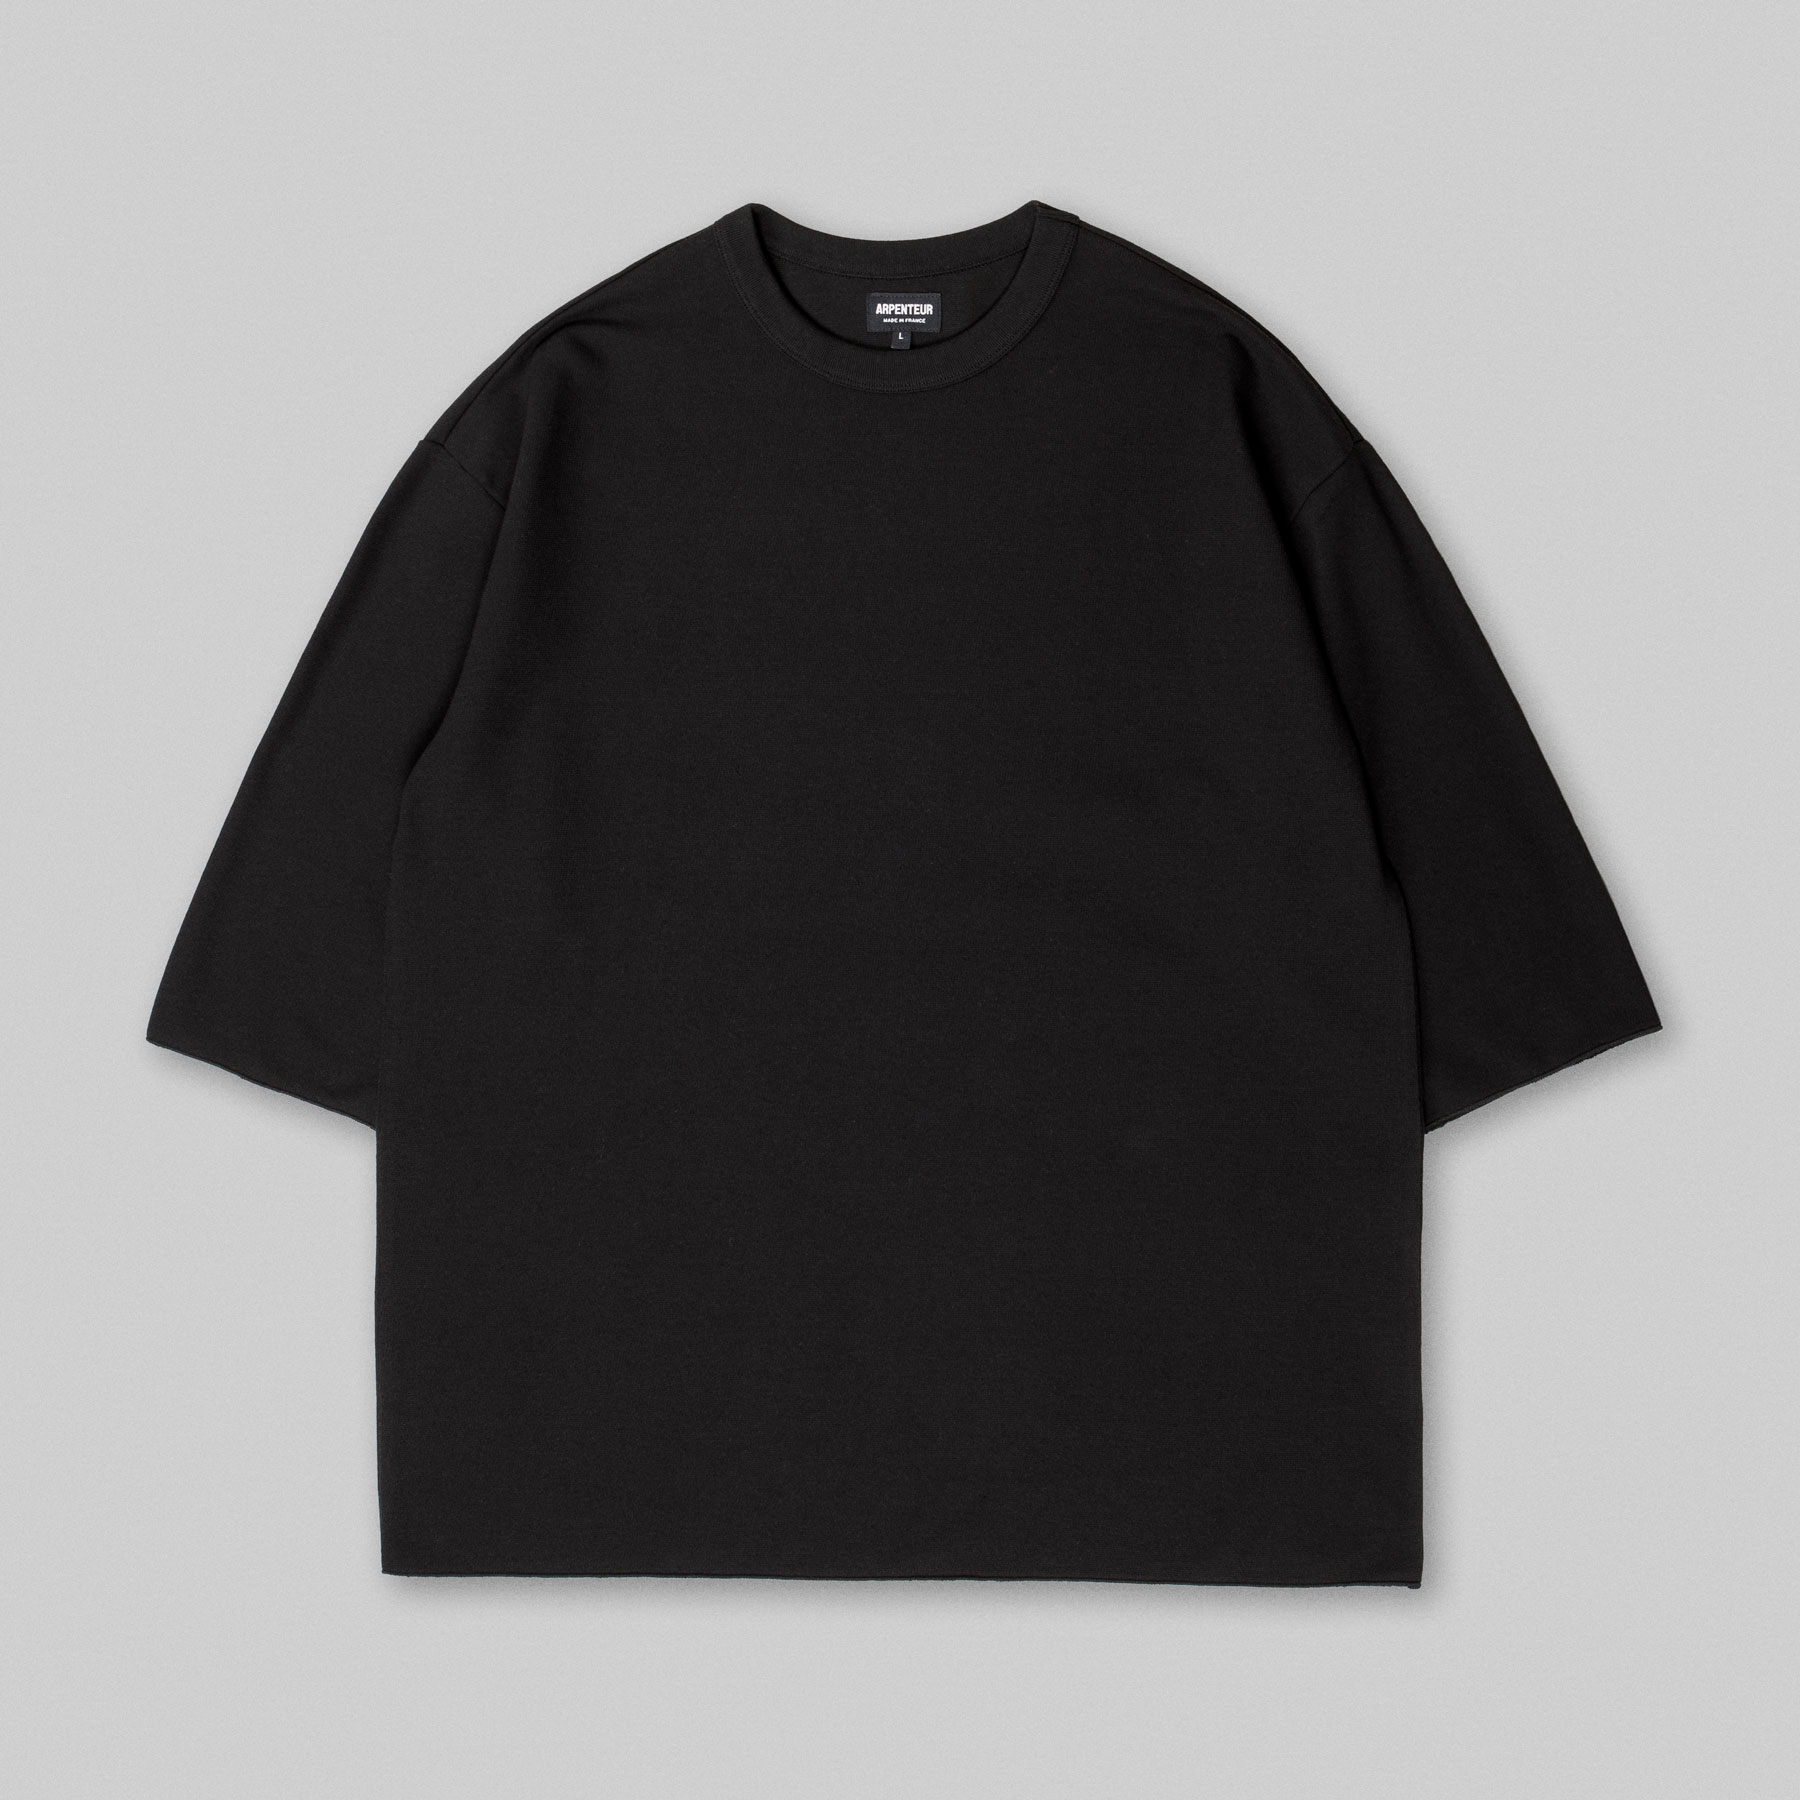 MARINIERE t-shirt by Arpenteur in Black color